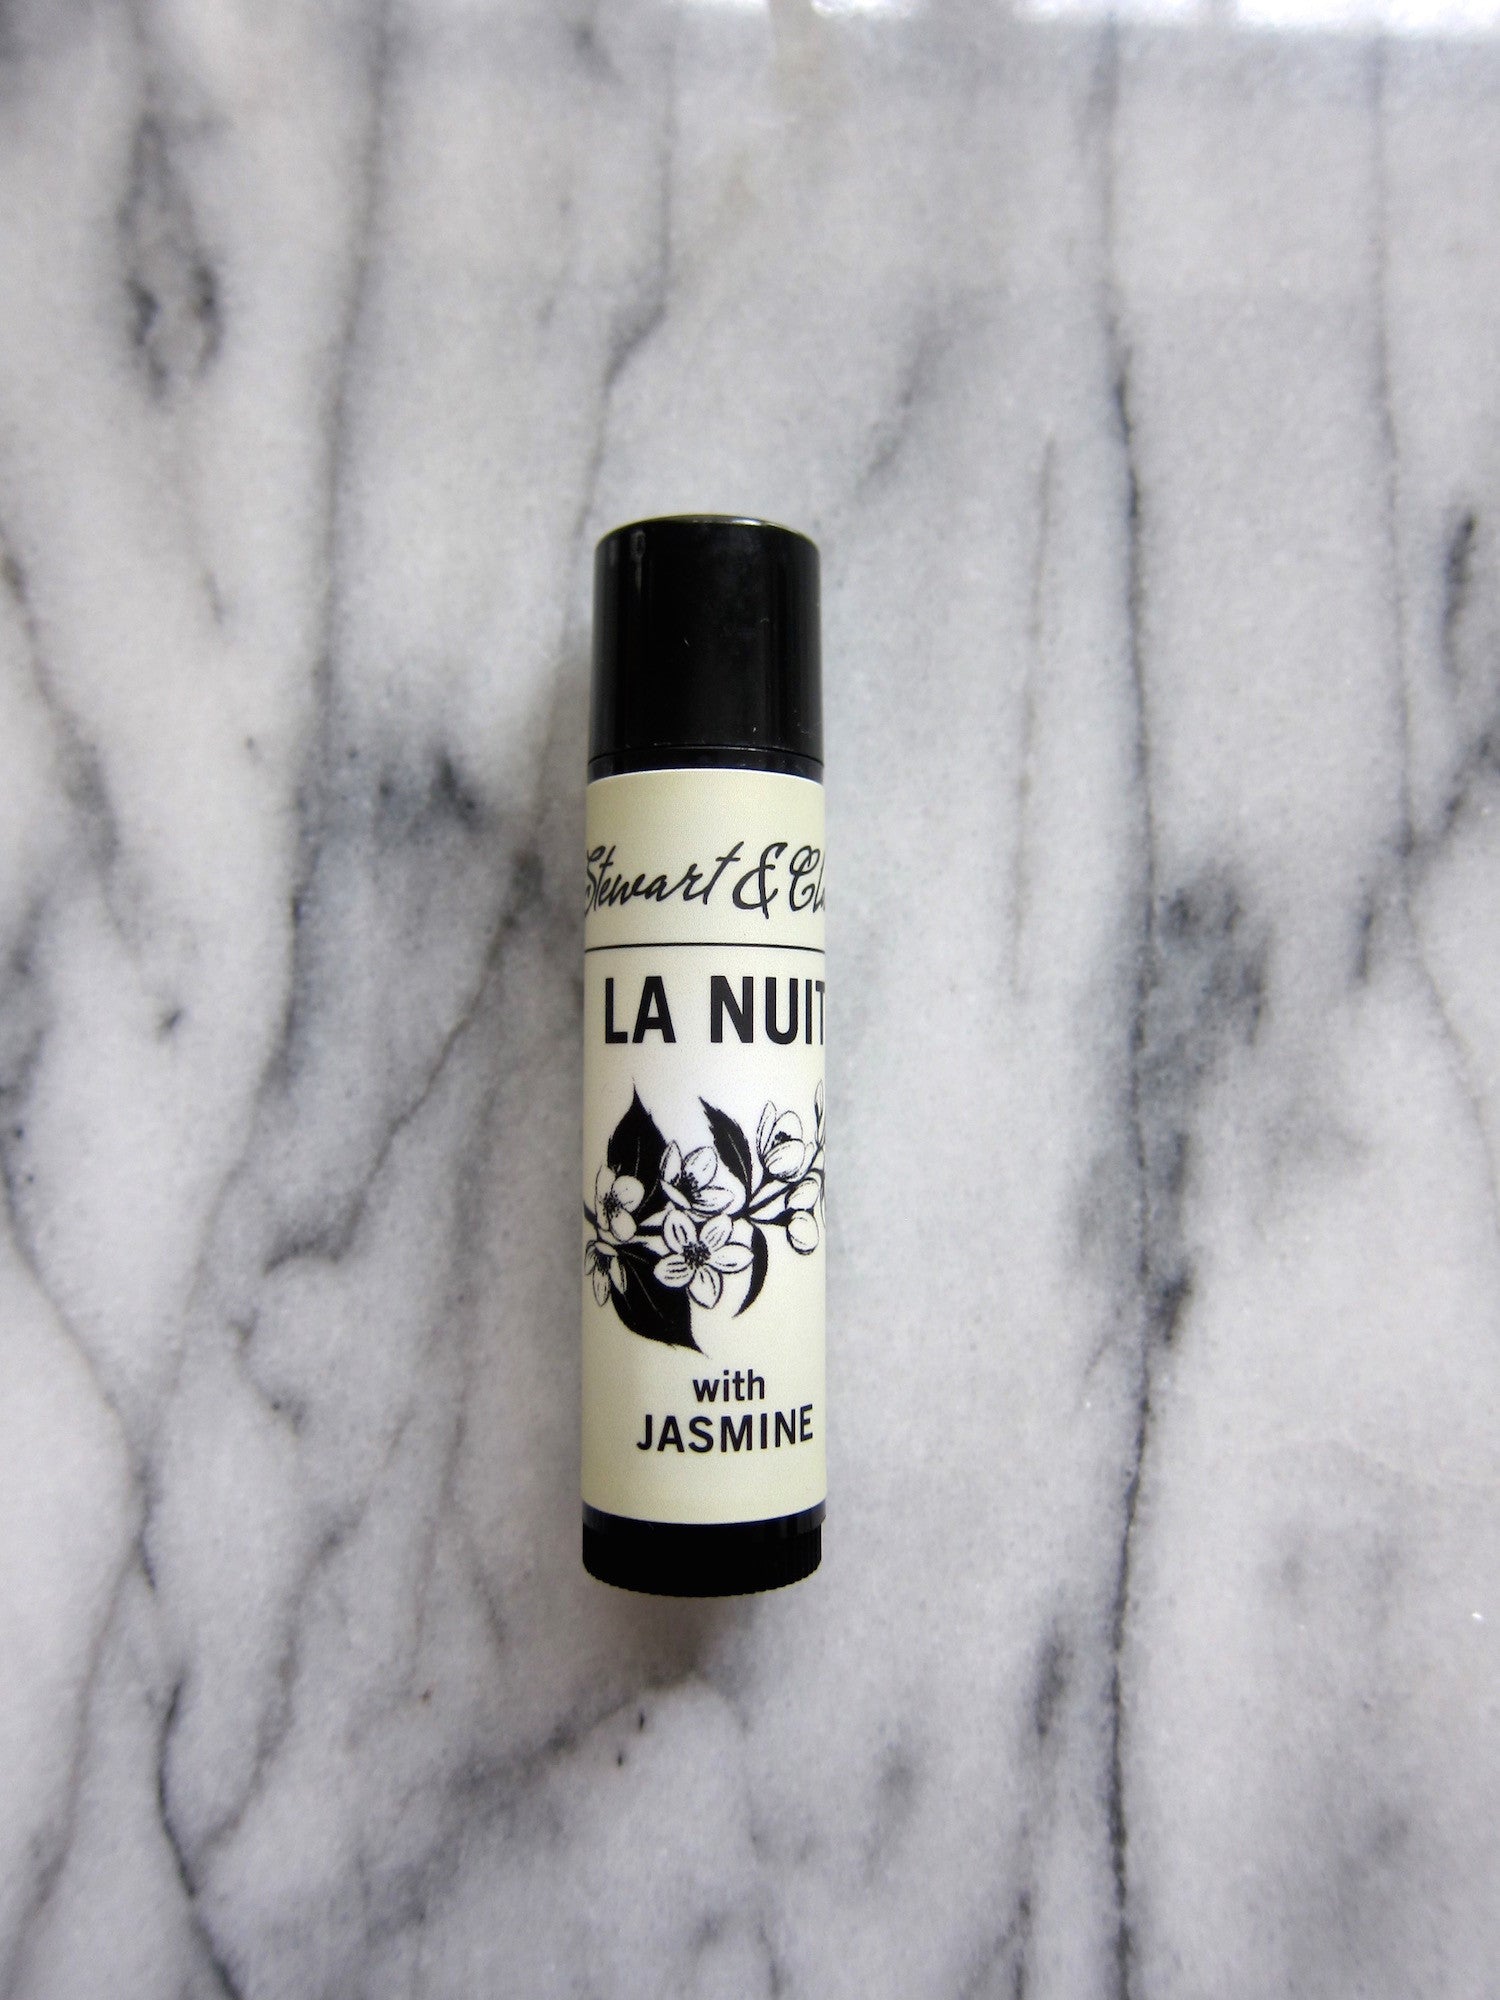 An image of a .15 ounce lip balm tube in black plastic. The tube has a an off-white label that says Stewart & Claire in black script. Then La Nuit in large black letters. Below that is a black and white illustration of jasmine and below it, the text says, with jasmine. It is on a marble background. 